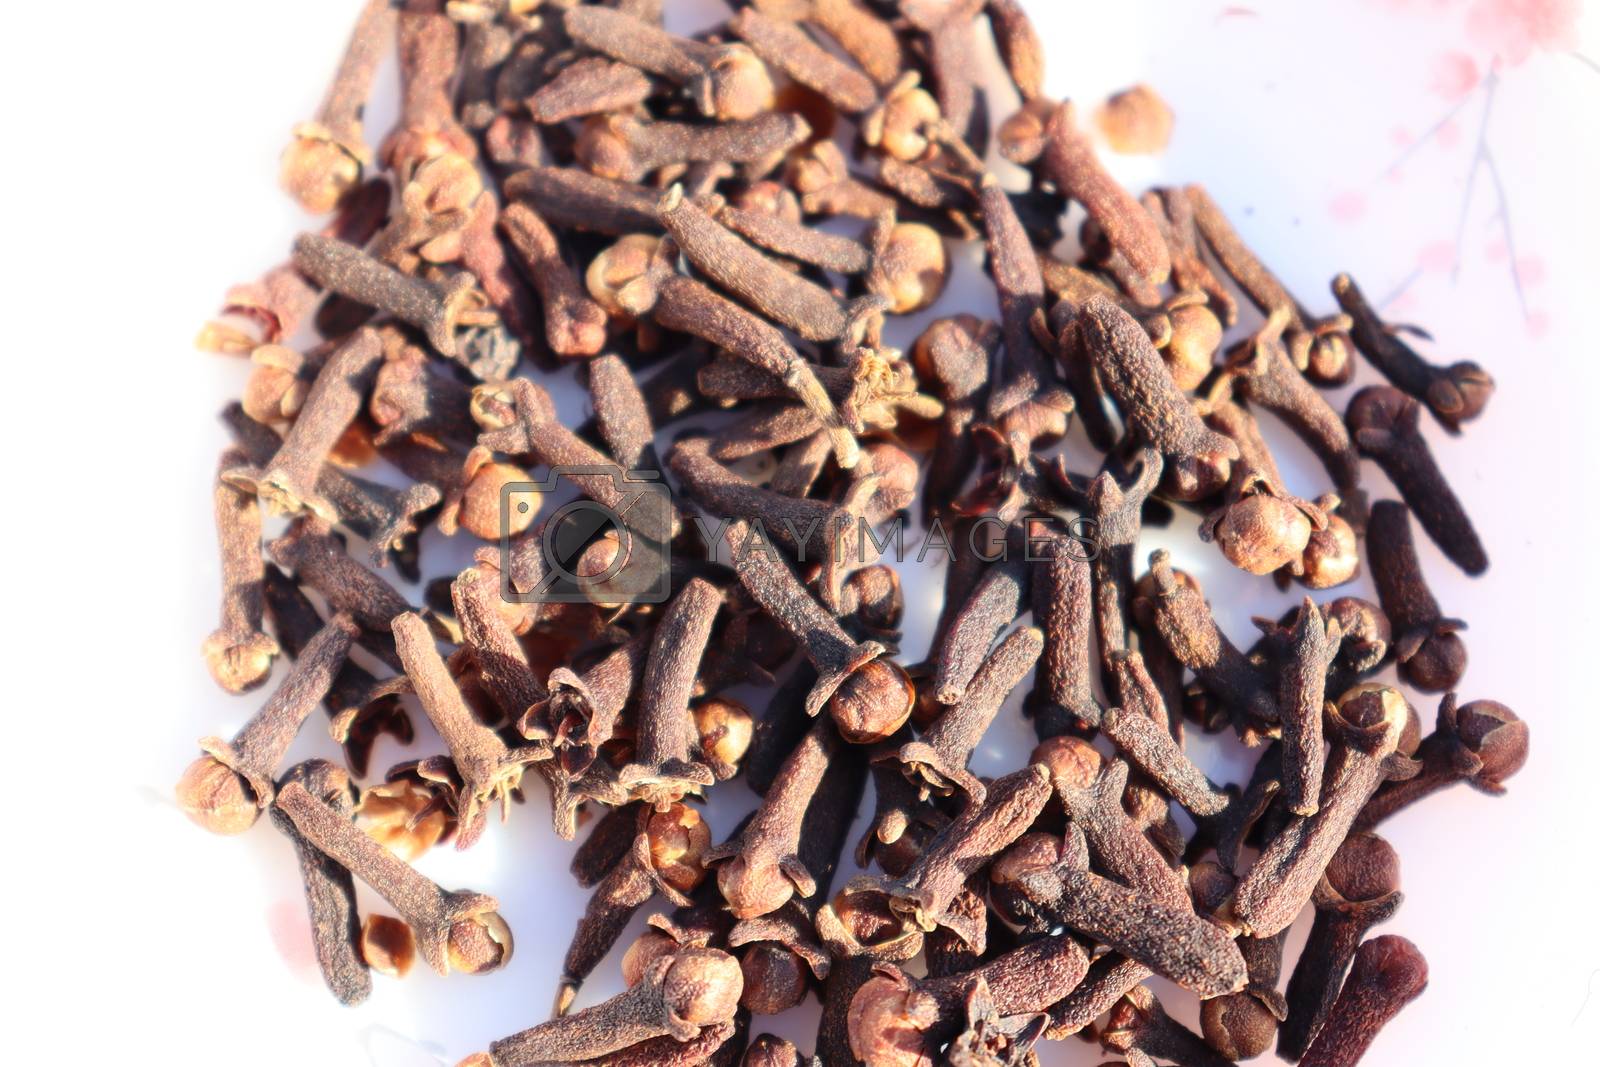 Royalty free image of healthy and spicy Clove stock by jahidul2358